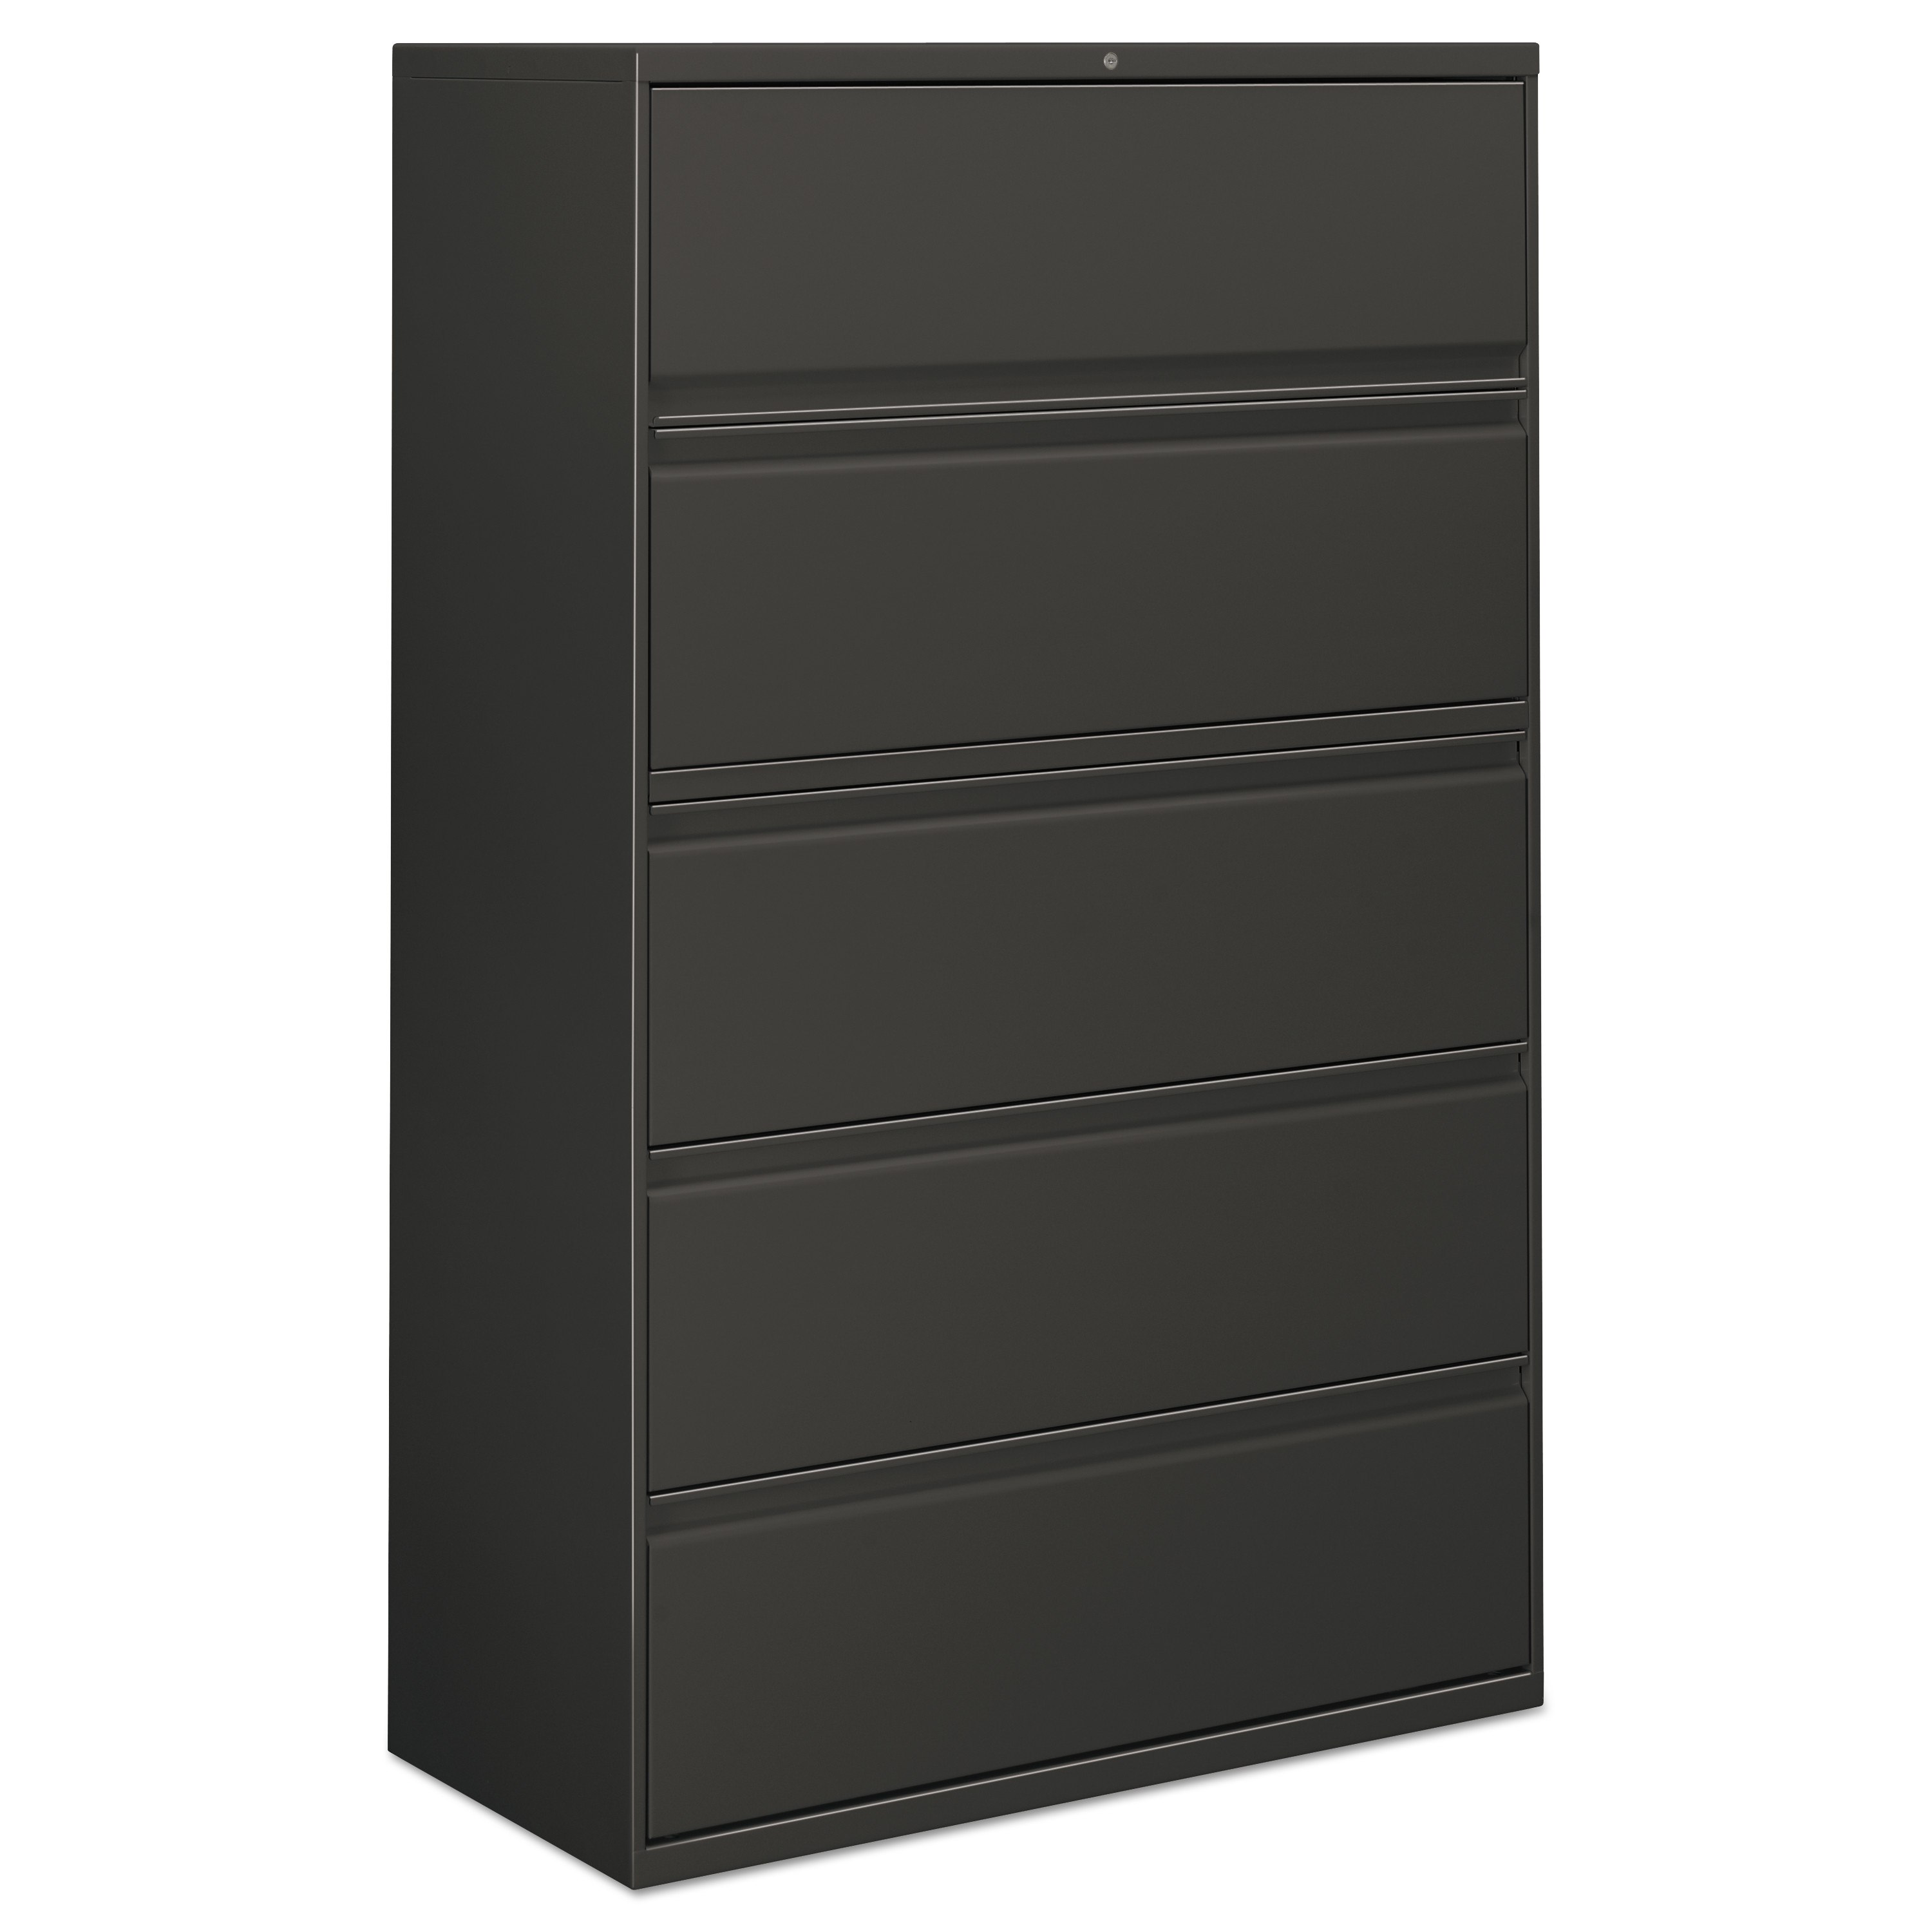 Alera Five-drawer Lateral File Cabinet, 42w X 18d X 64.25h, Charcoal - image 1 of 2